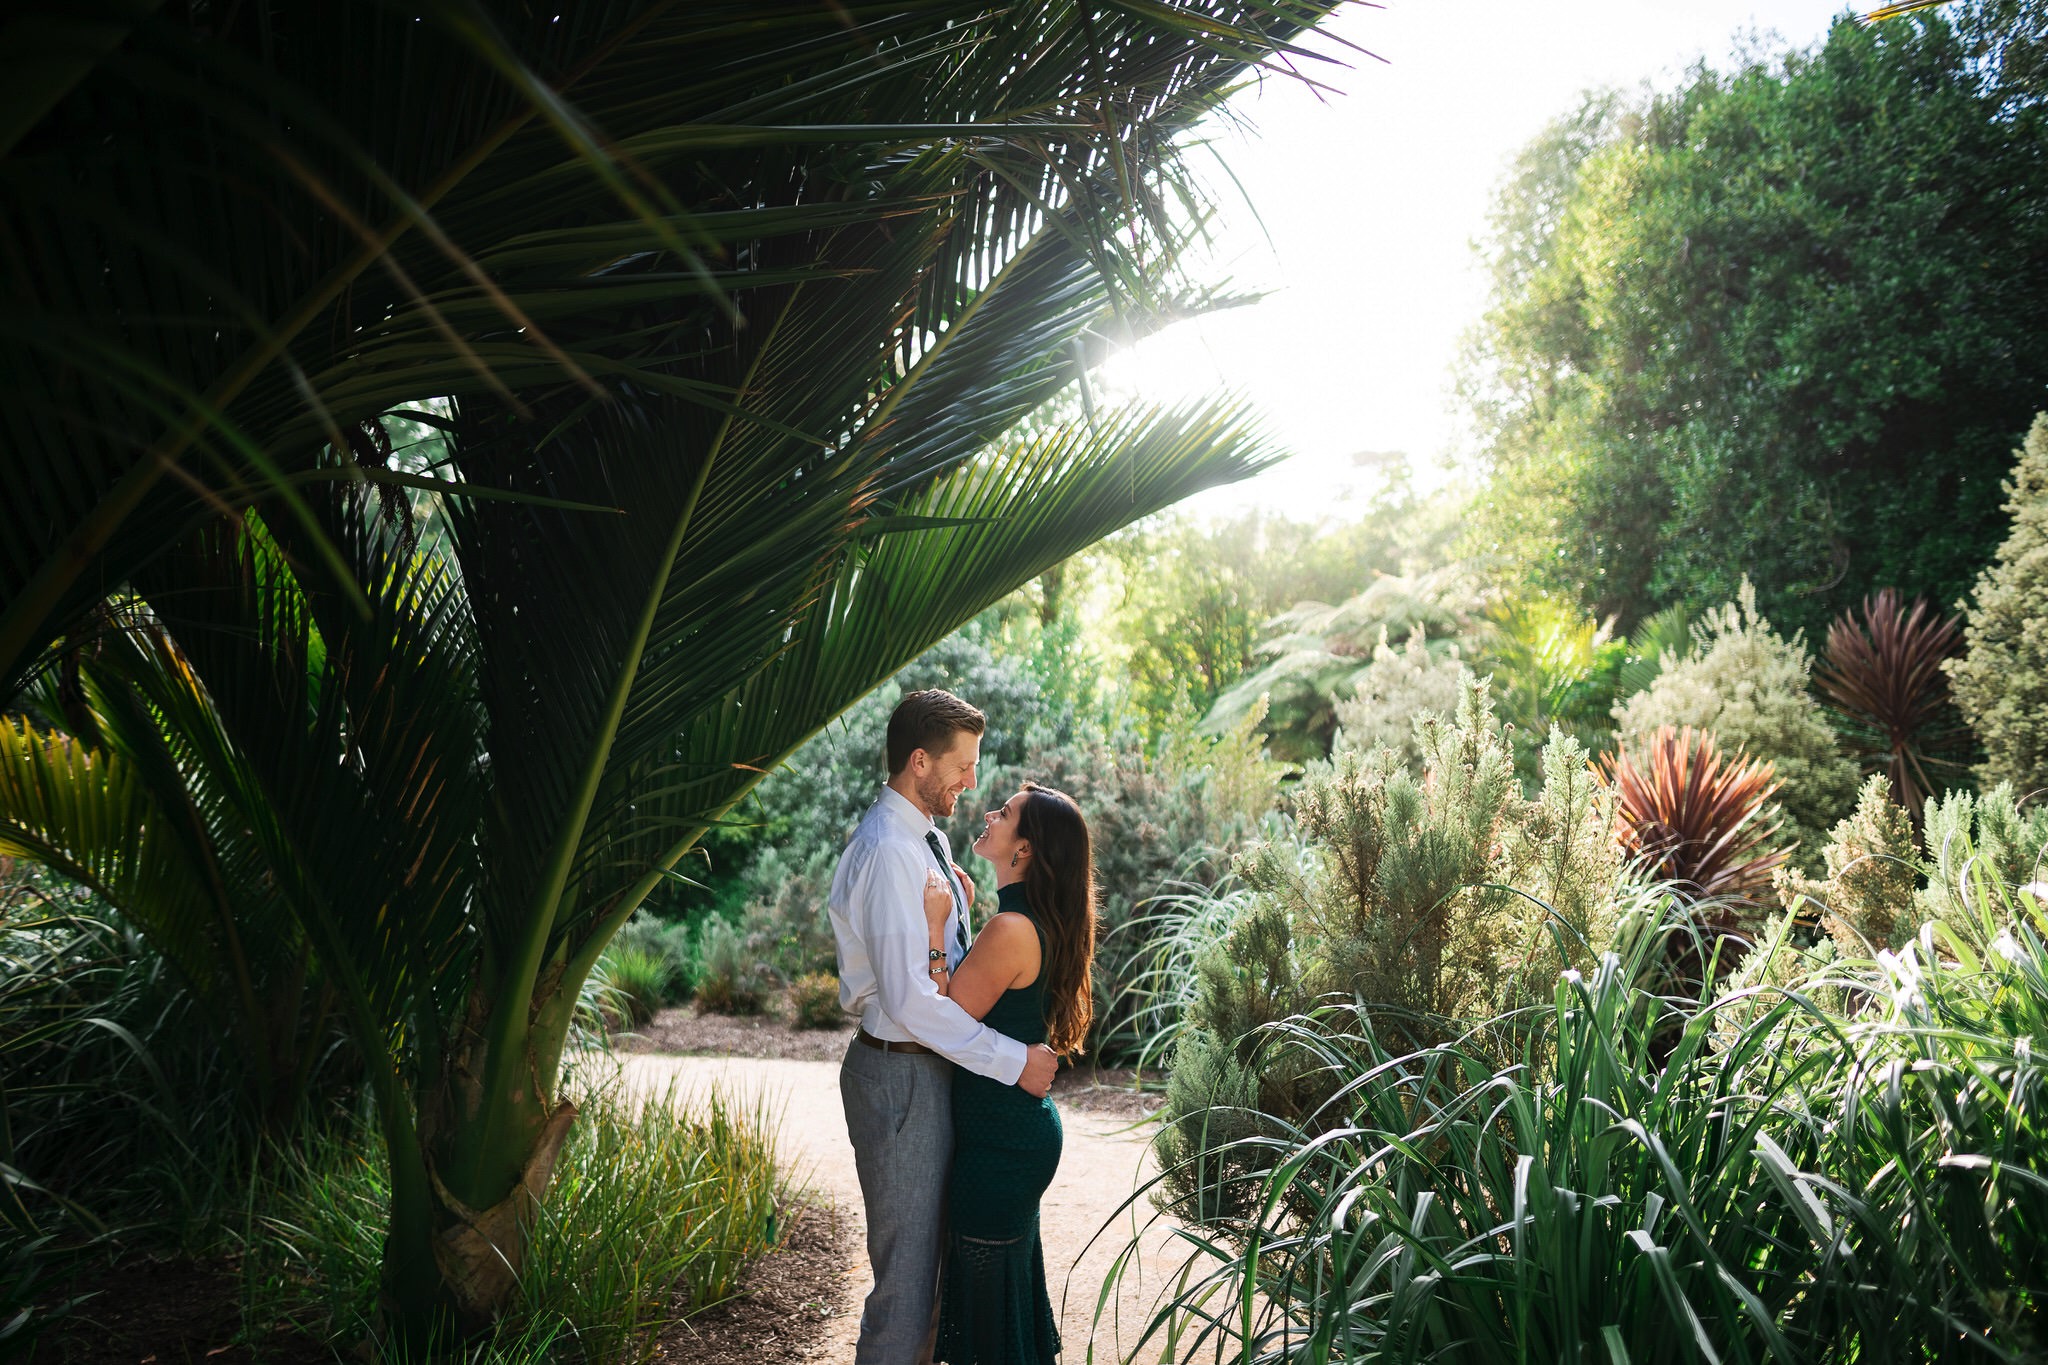  SF Botanical Garden Engagement Photos // Bay Area Wedding Photographer

Photo by Trung Hoang Photography |www.trunghoangphotography.com | San Francisco Bay Area Wedding Photographer 